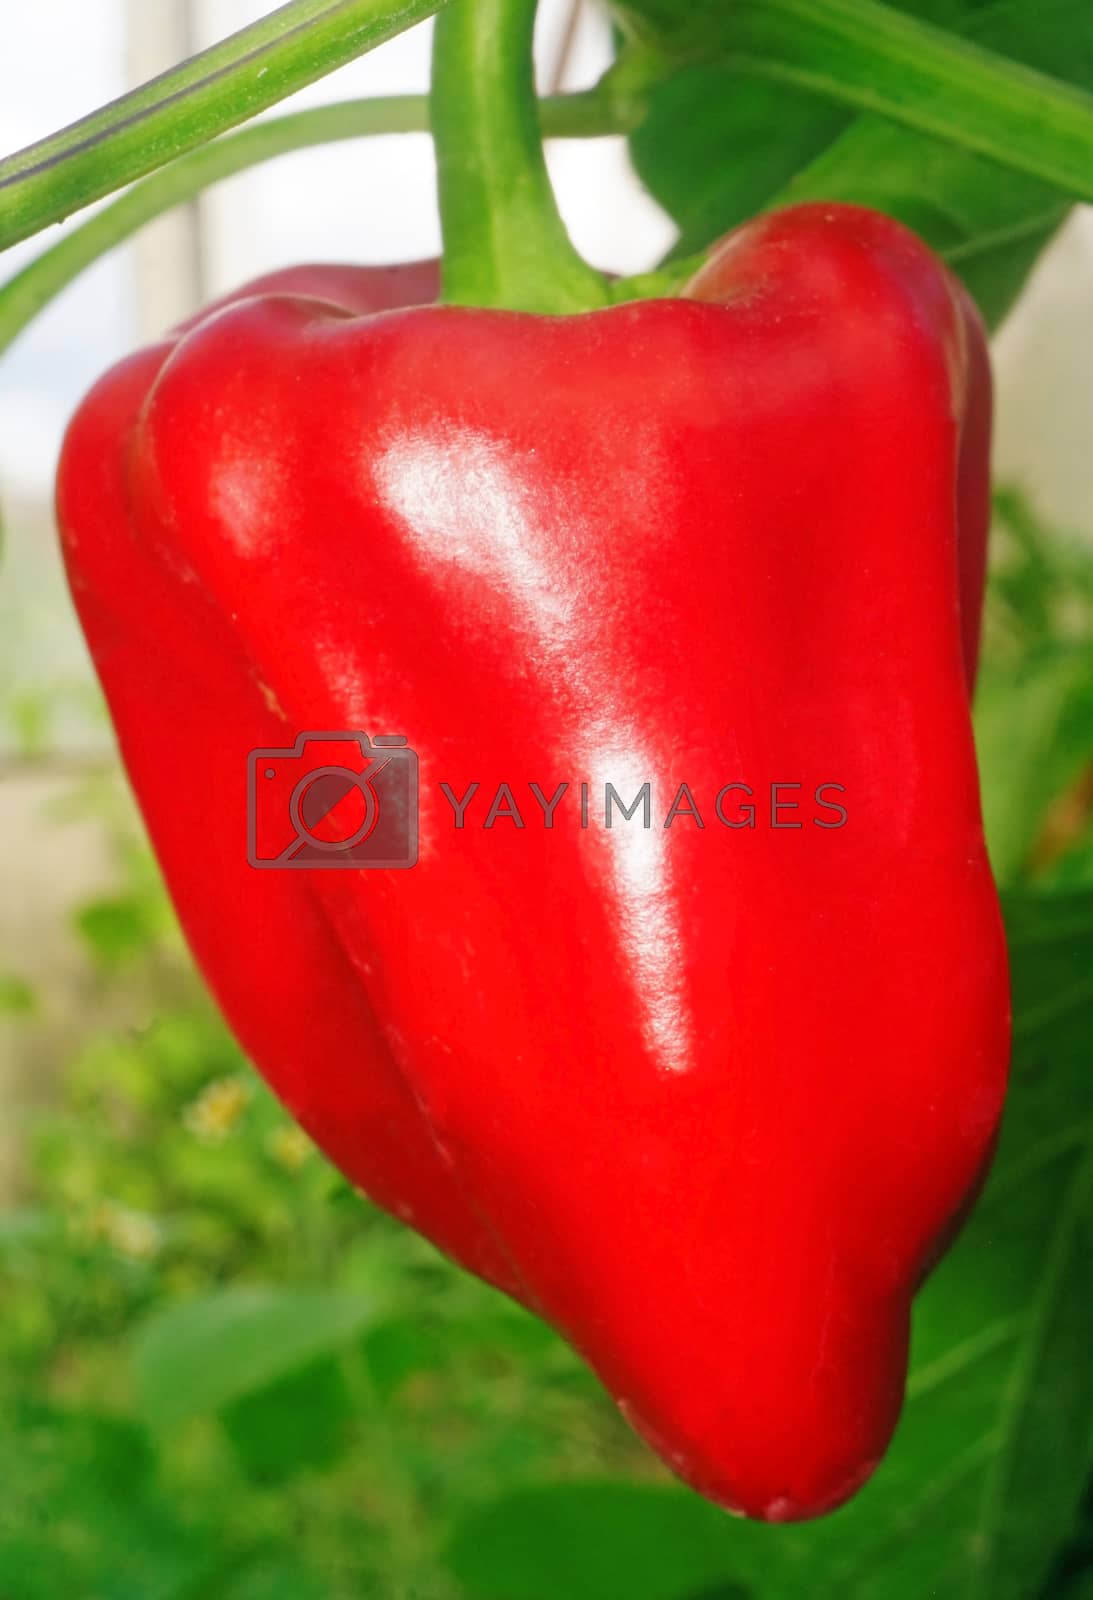 Royalty free image of Sweet red Pepper in a greenhouse closeup by Chiffanna